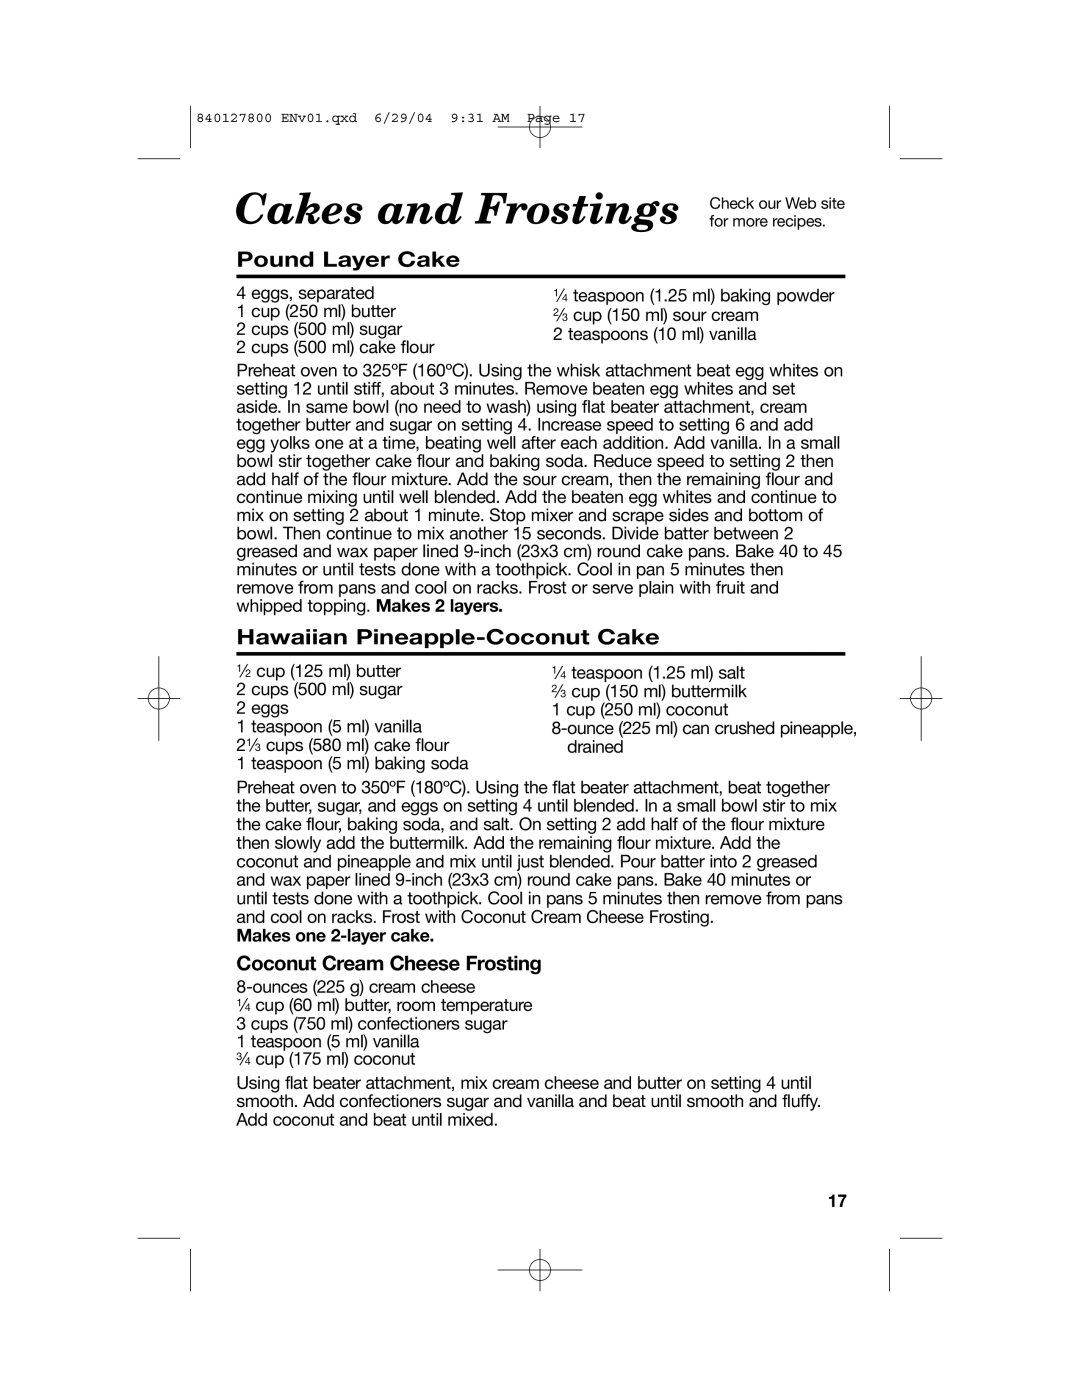 Hamilton Beach 63225 manual Cakes and Frostings for more recipes, Pound Layer Cake, Hawaiian Pineapple-CoconutCake 